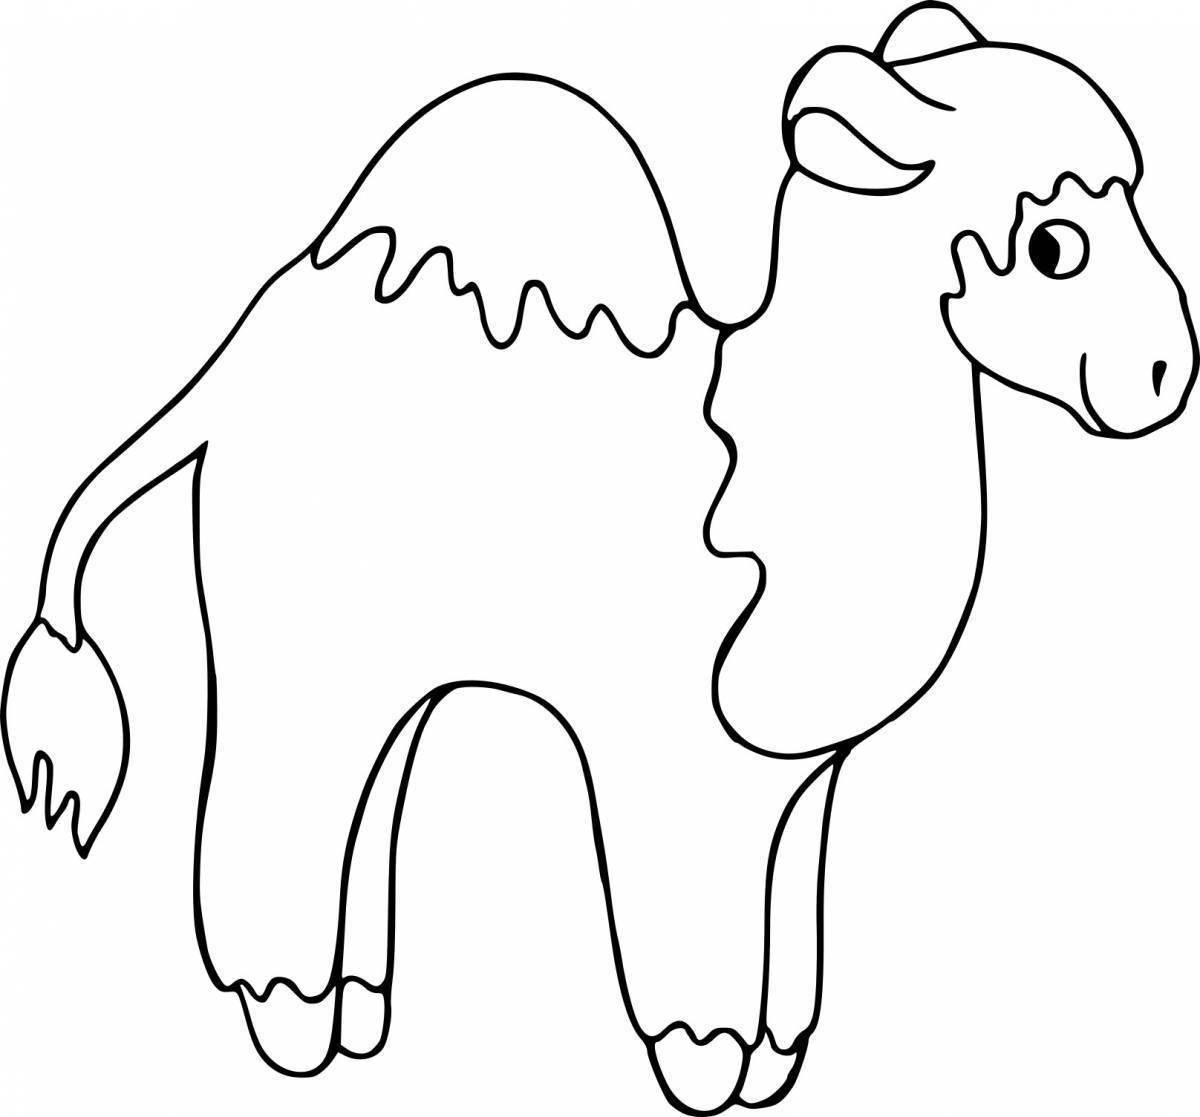 A fun camel coloring book for kids